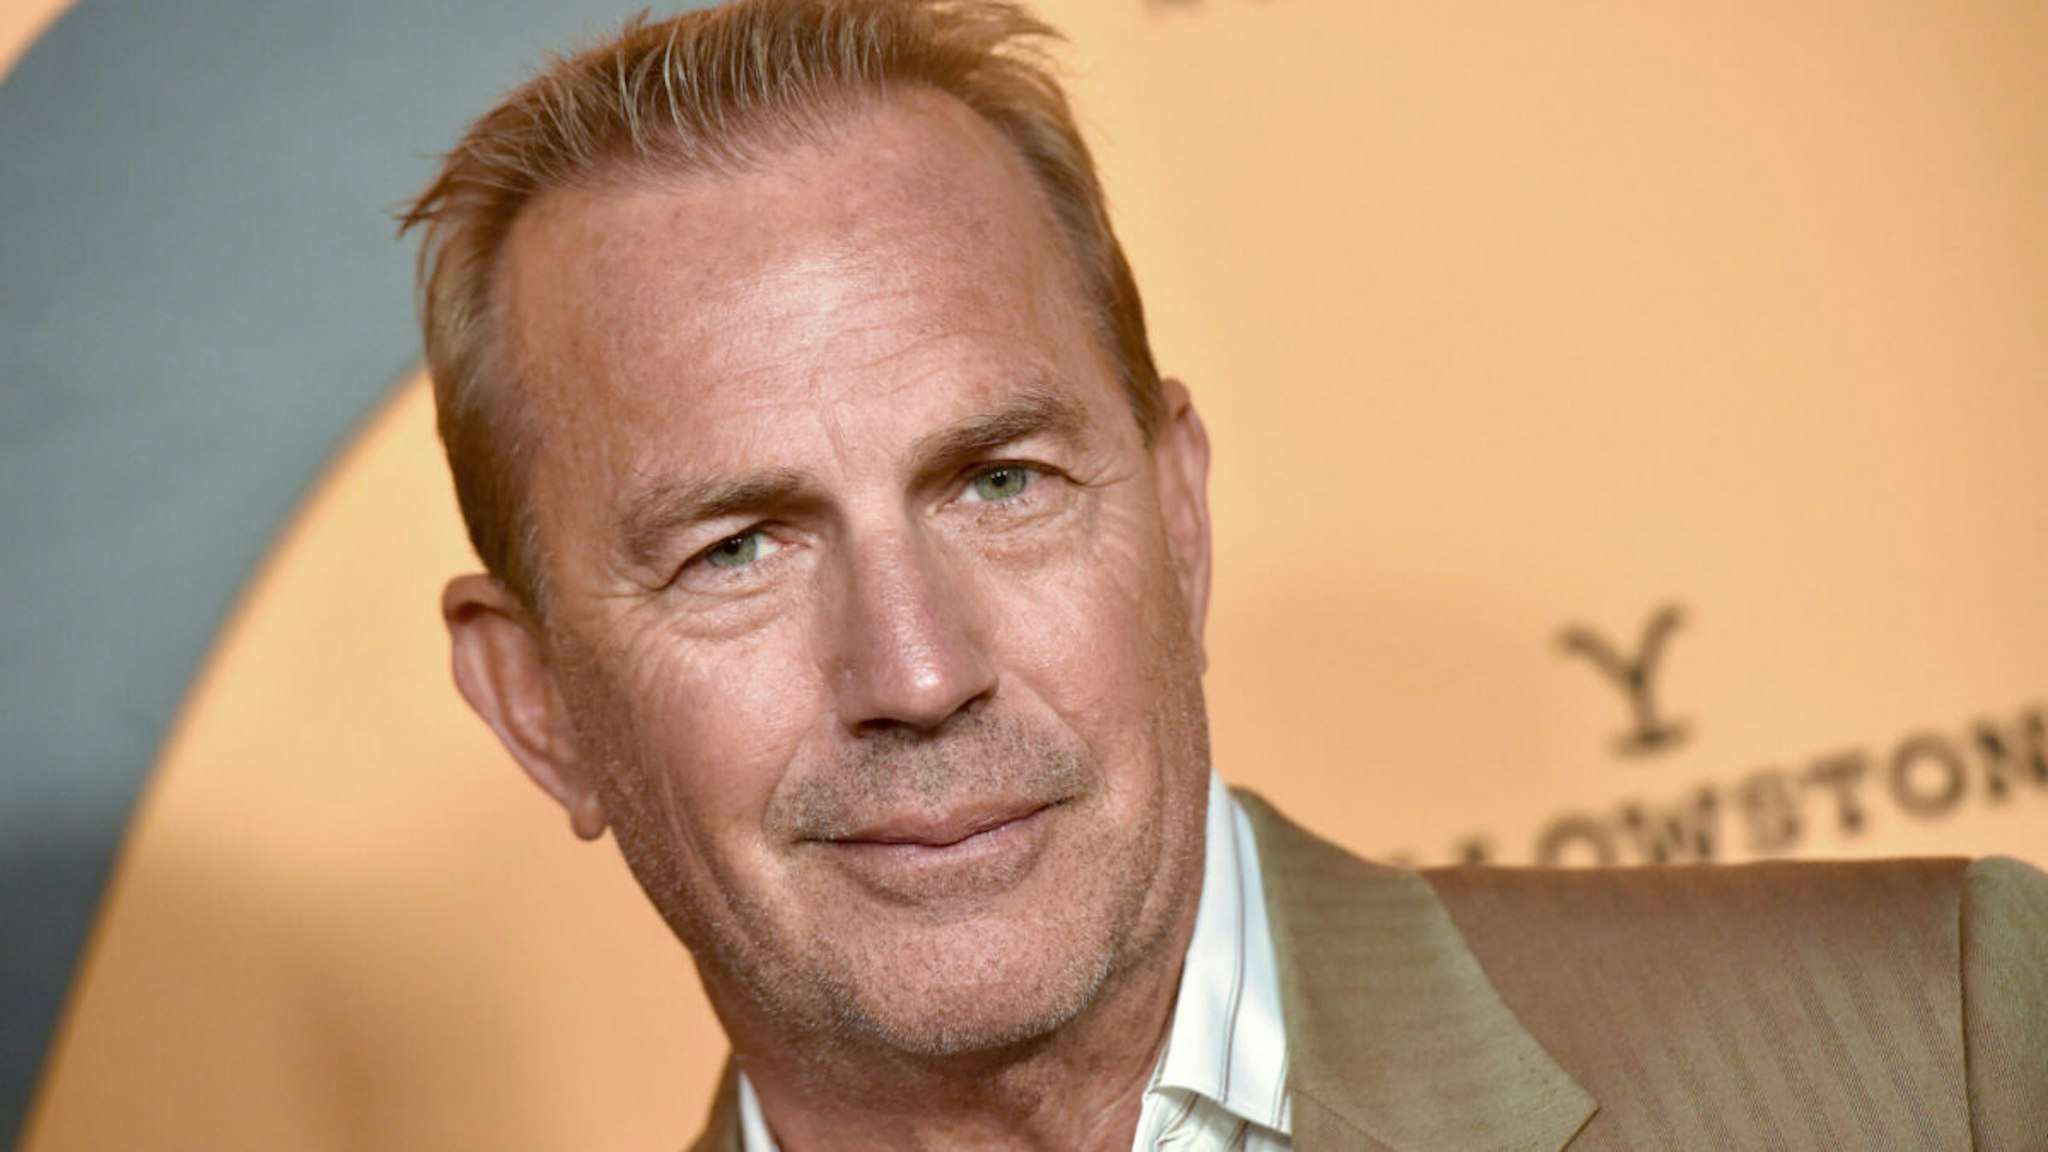 Kevin Costner attends the premiere party for Paramount Network's "Yellowstone" Season 2 at Lombardi House on May 30, 2019 in Los Angeles, California.